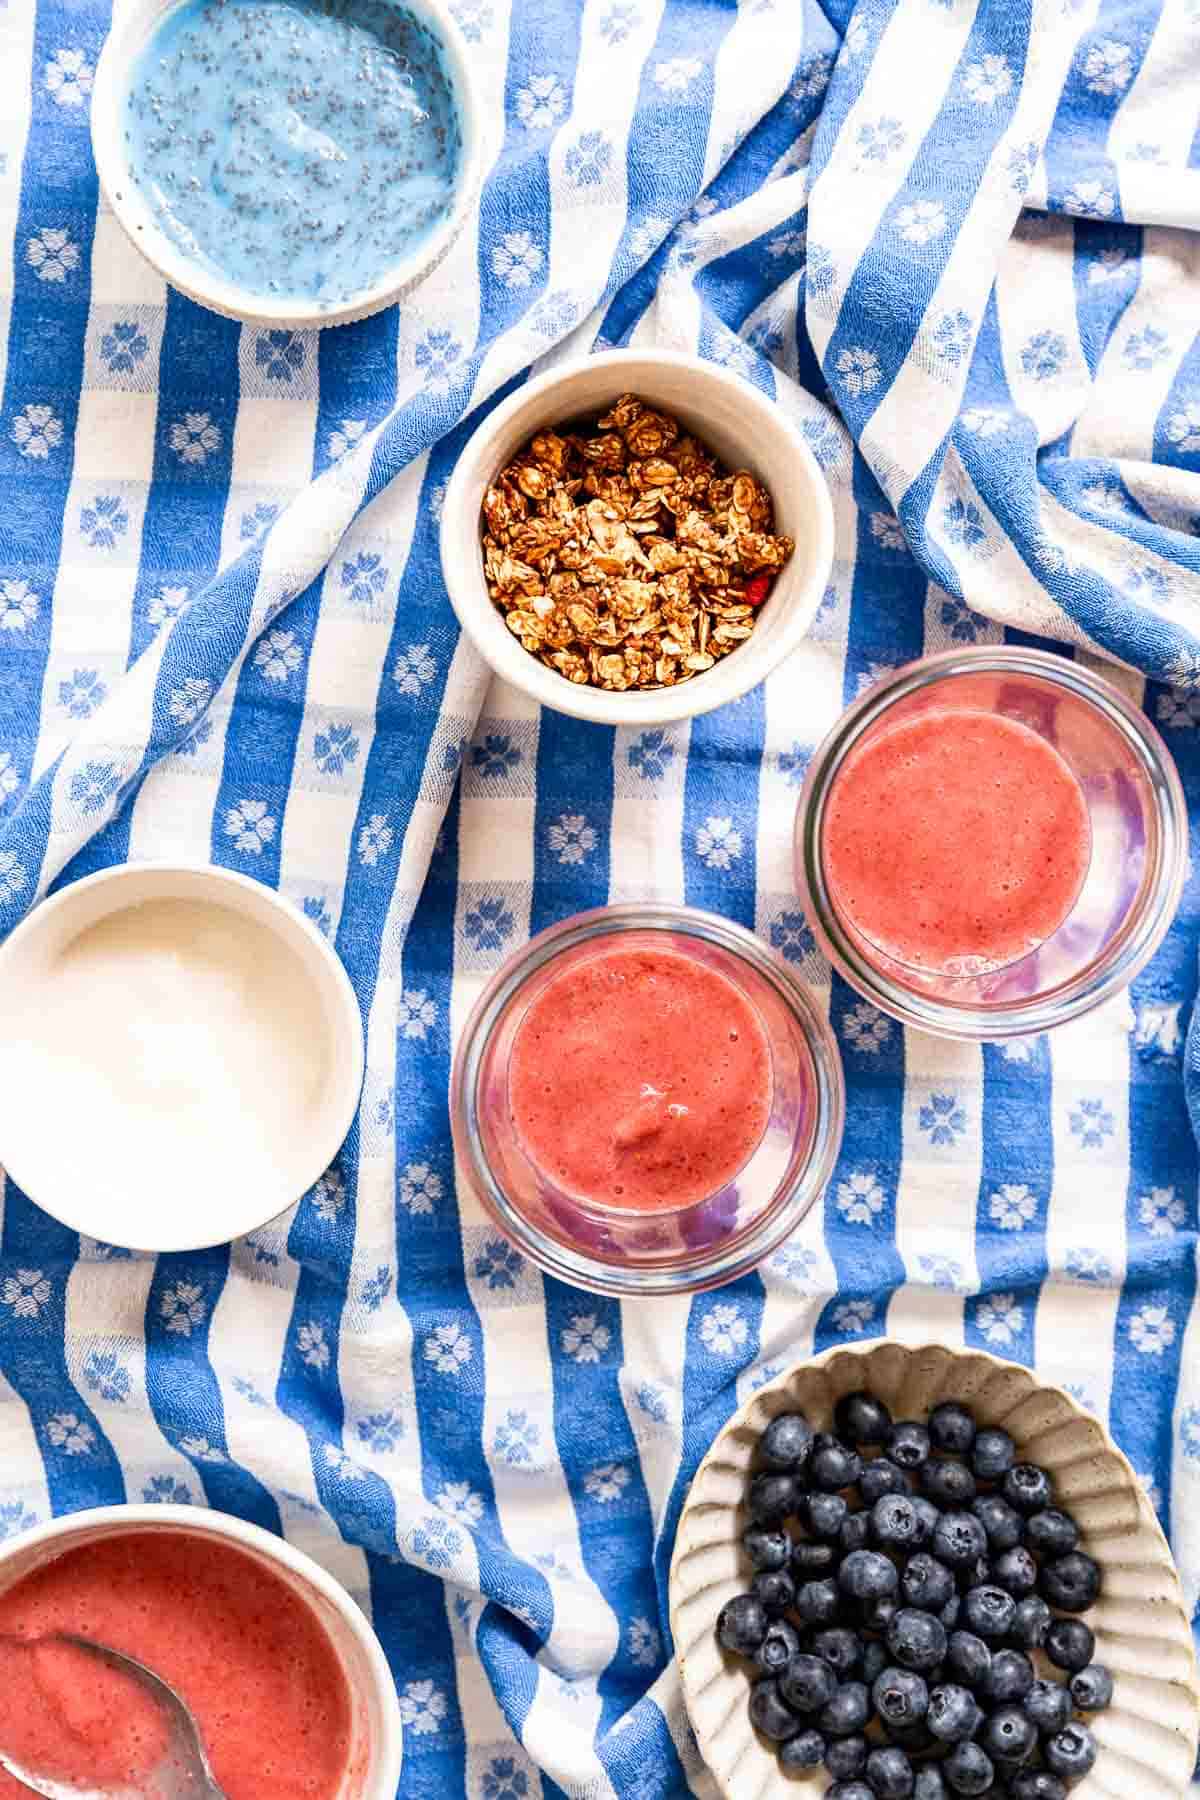 Two jars with strawberry smoothie inside surrounded by ramekins of granola, yogurt, and blueberries.